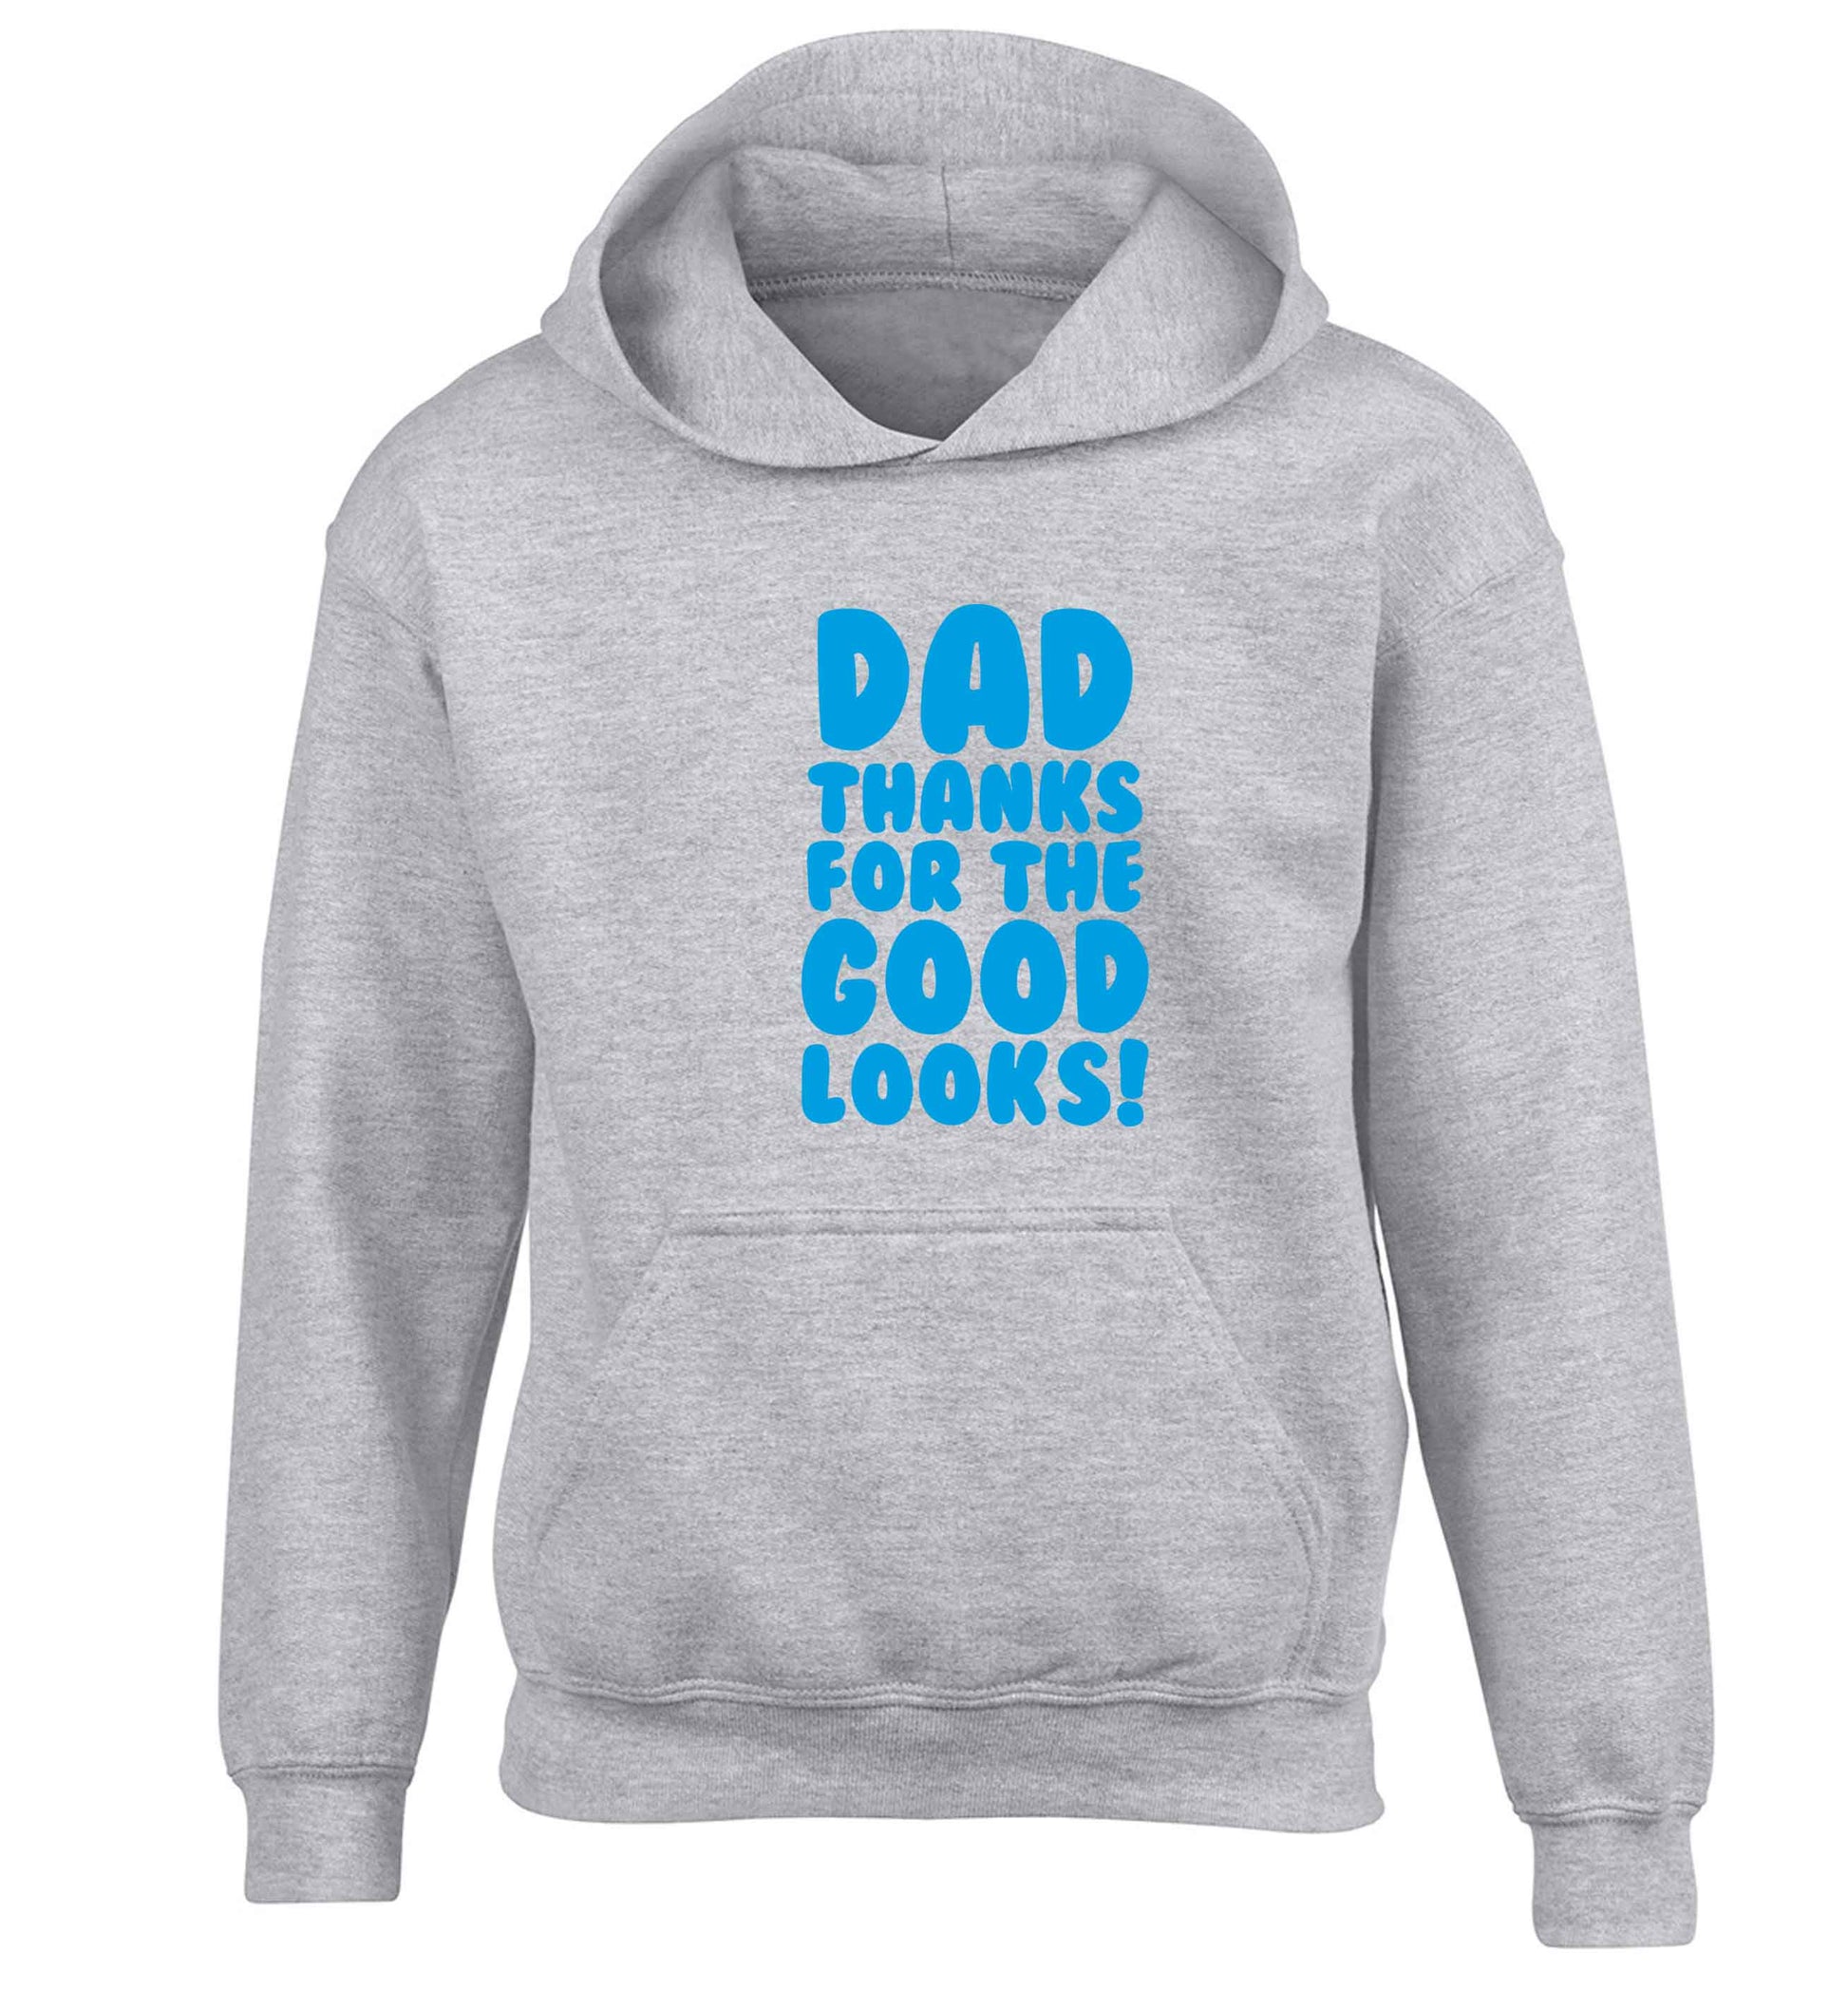 Dad thanks for the good looks children's grey hoodie 12-13 Years